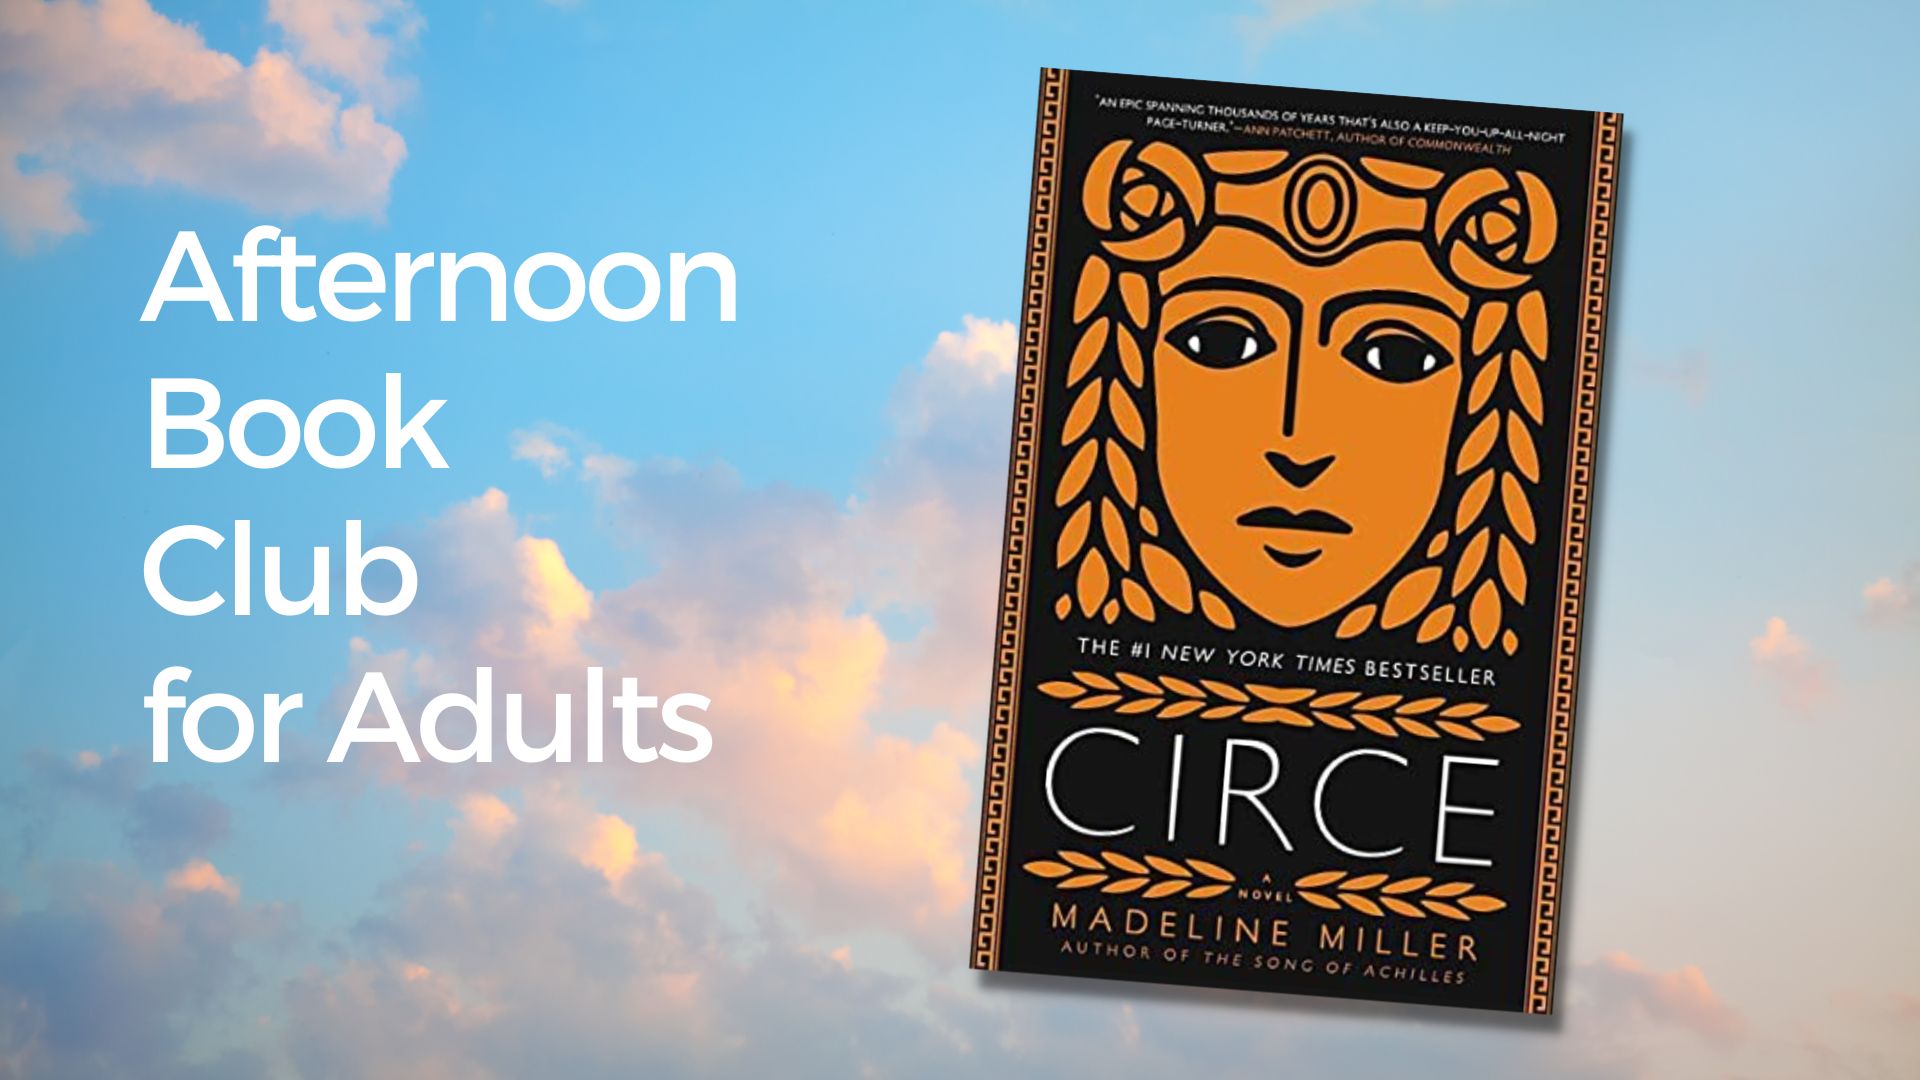 Afternoon Book Club selection Circe by Madeline Miller